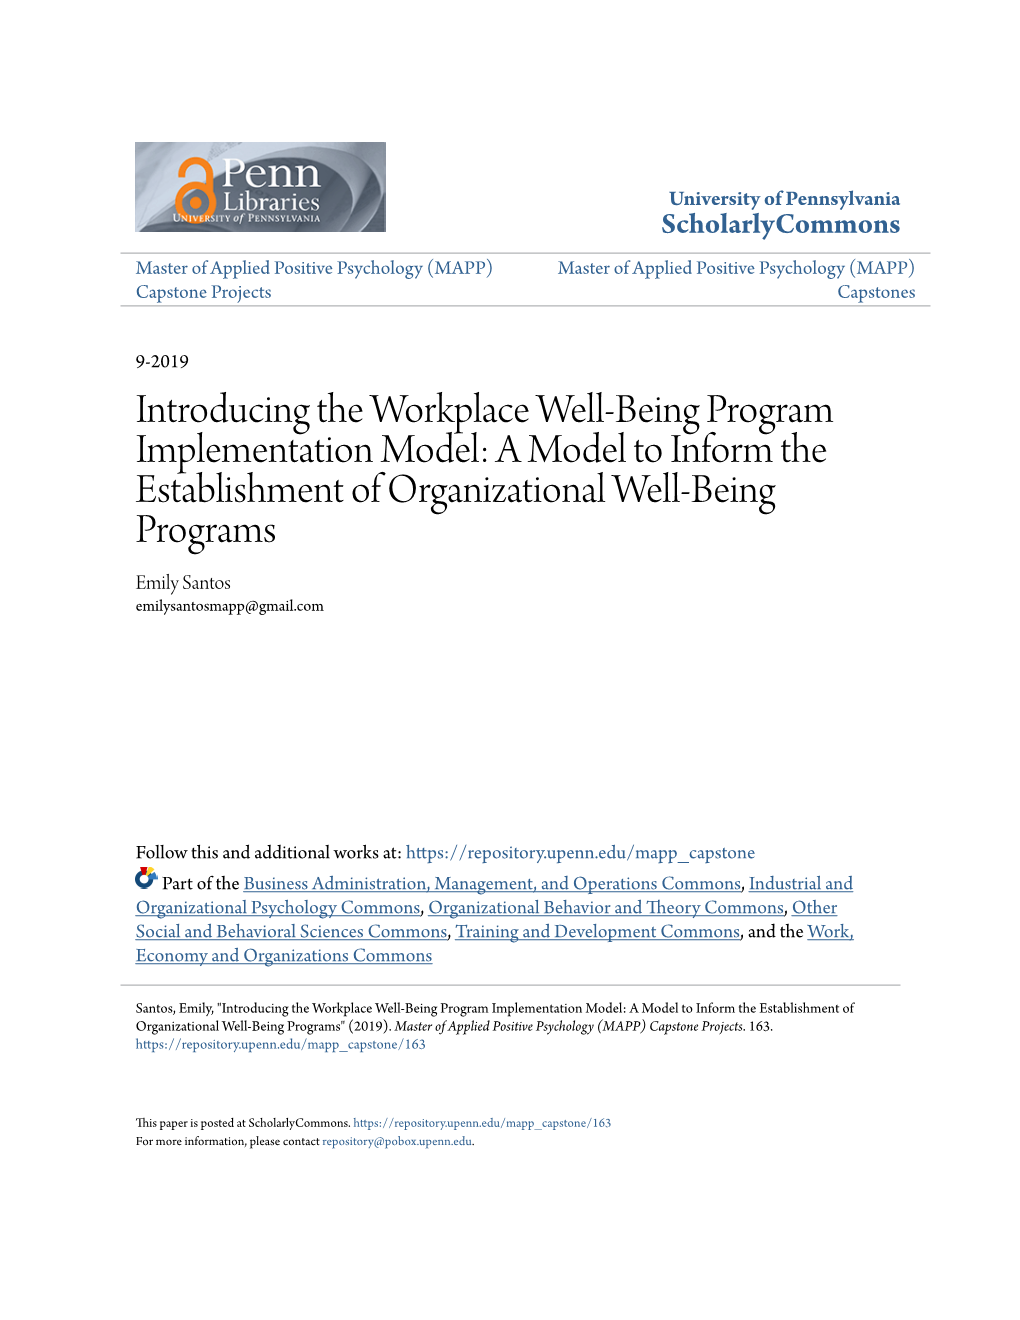 Introducing the Workplace Well-Being Program Implementation Model